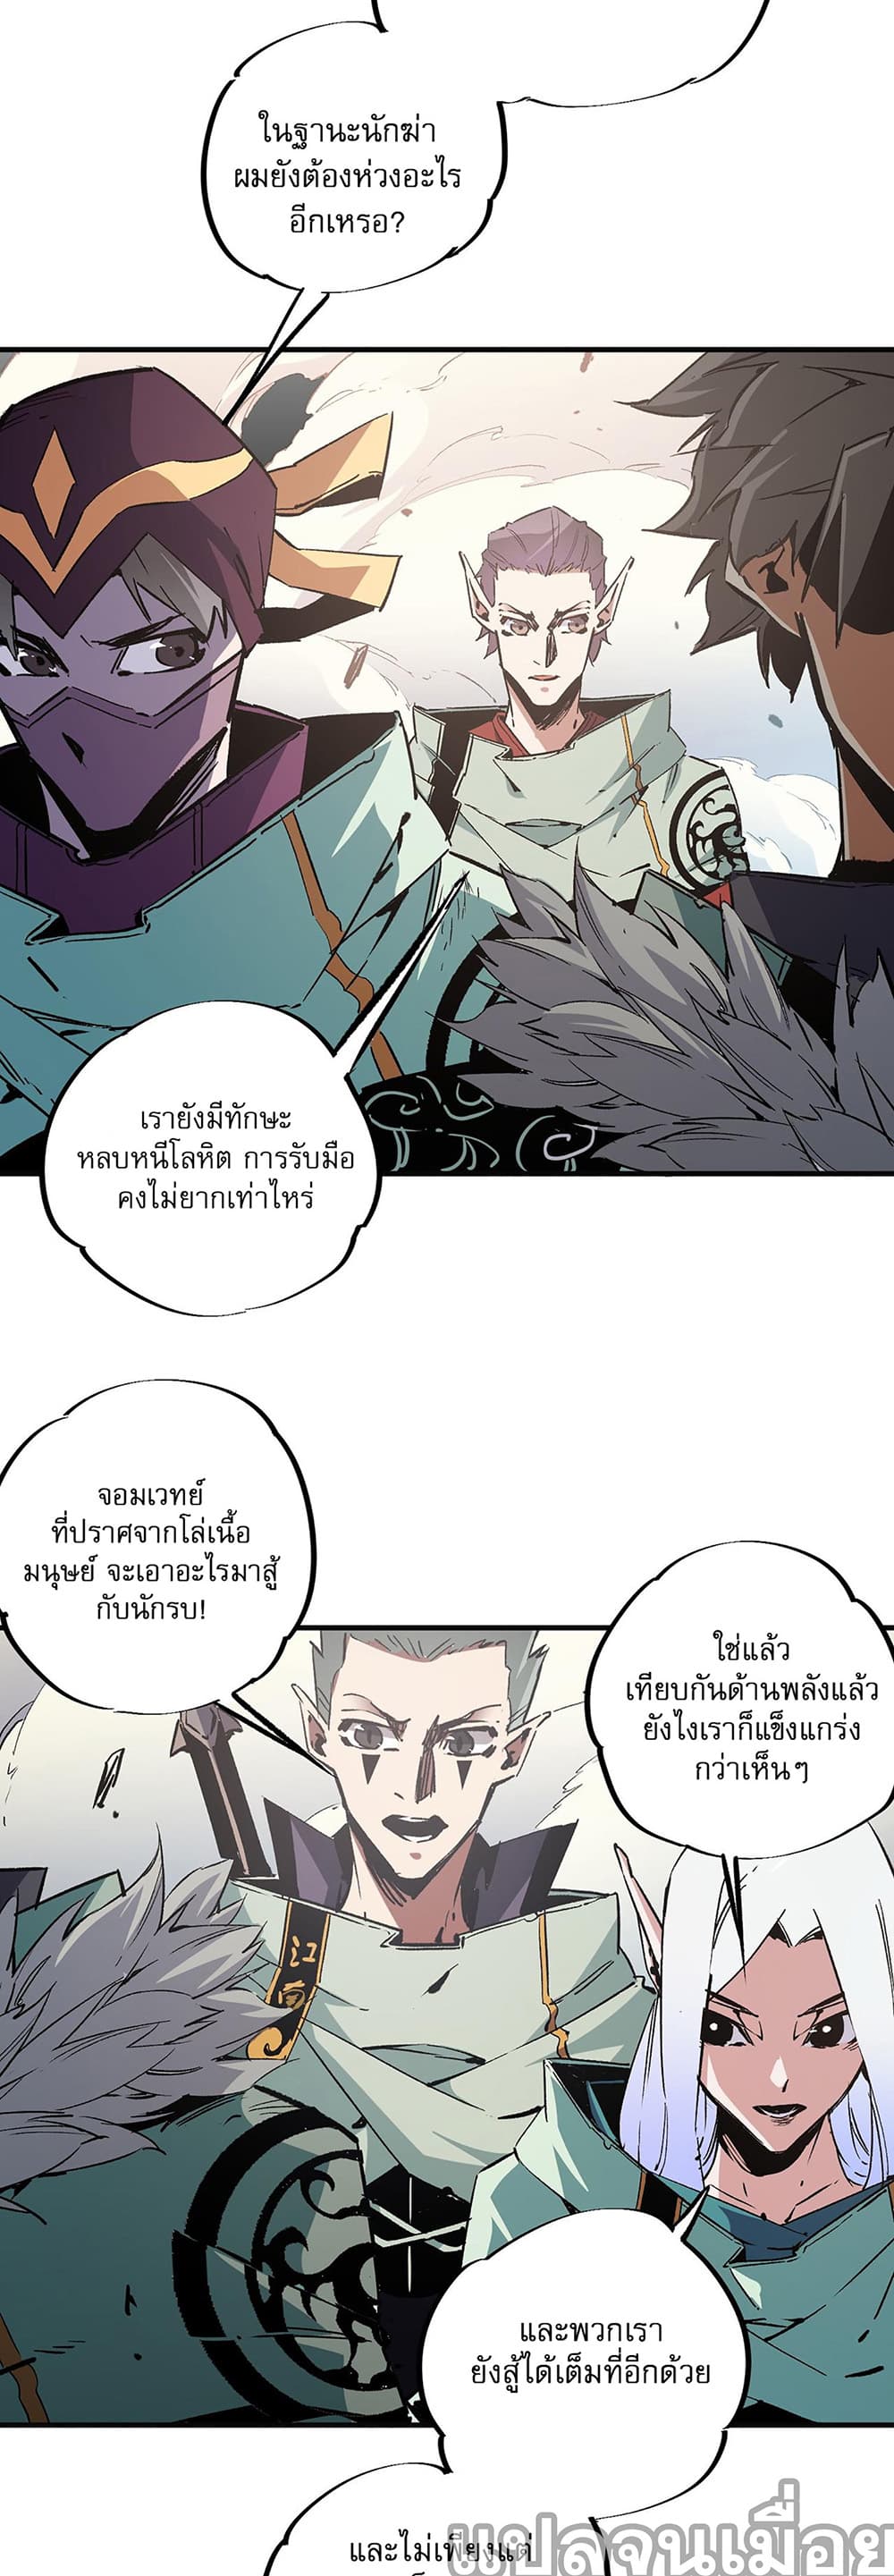 Job Changing for the Entire Population: The Jobless Me Will Terminate the Gods ฉันคือผู้เล่นไร้อาชีพที่สังหารเหล่าเทพ 35-35